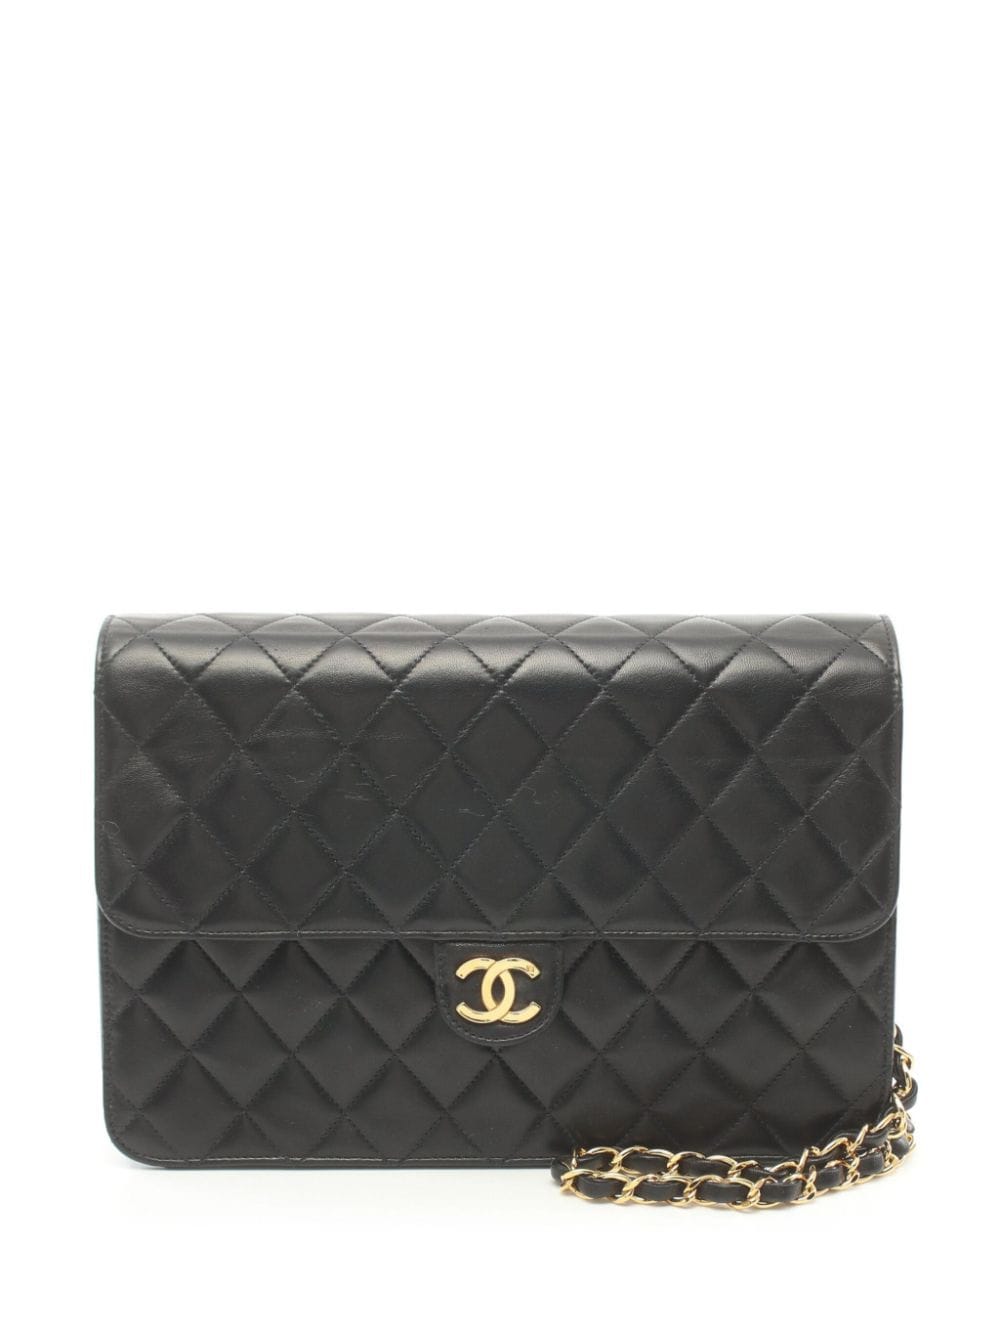 Pre-owned Chanel 1997-1999 Cc Plaque Diamond-quilted Shoulder Bag In Black